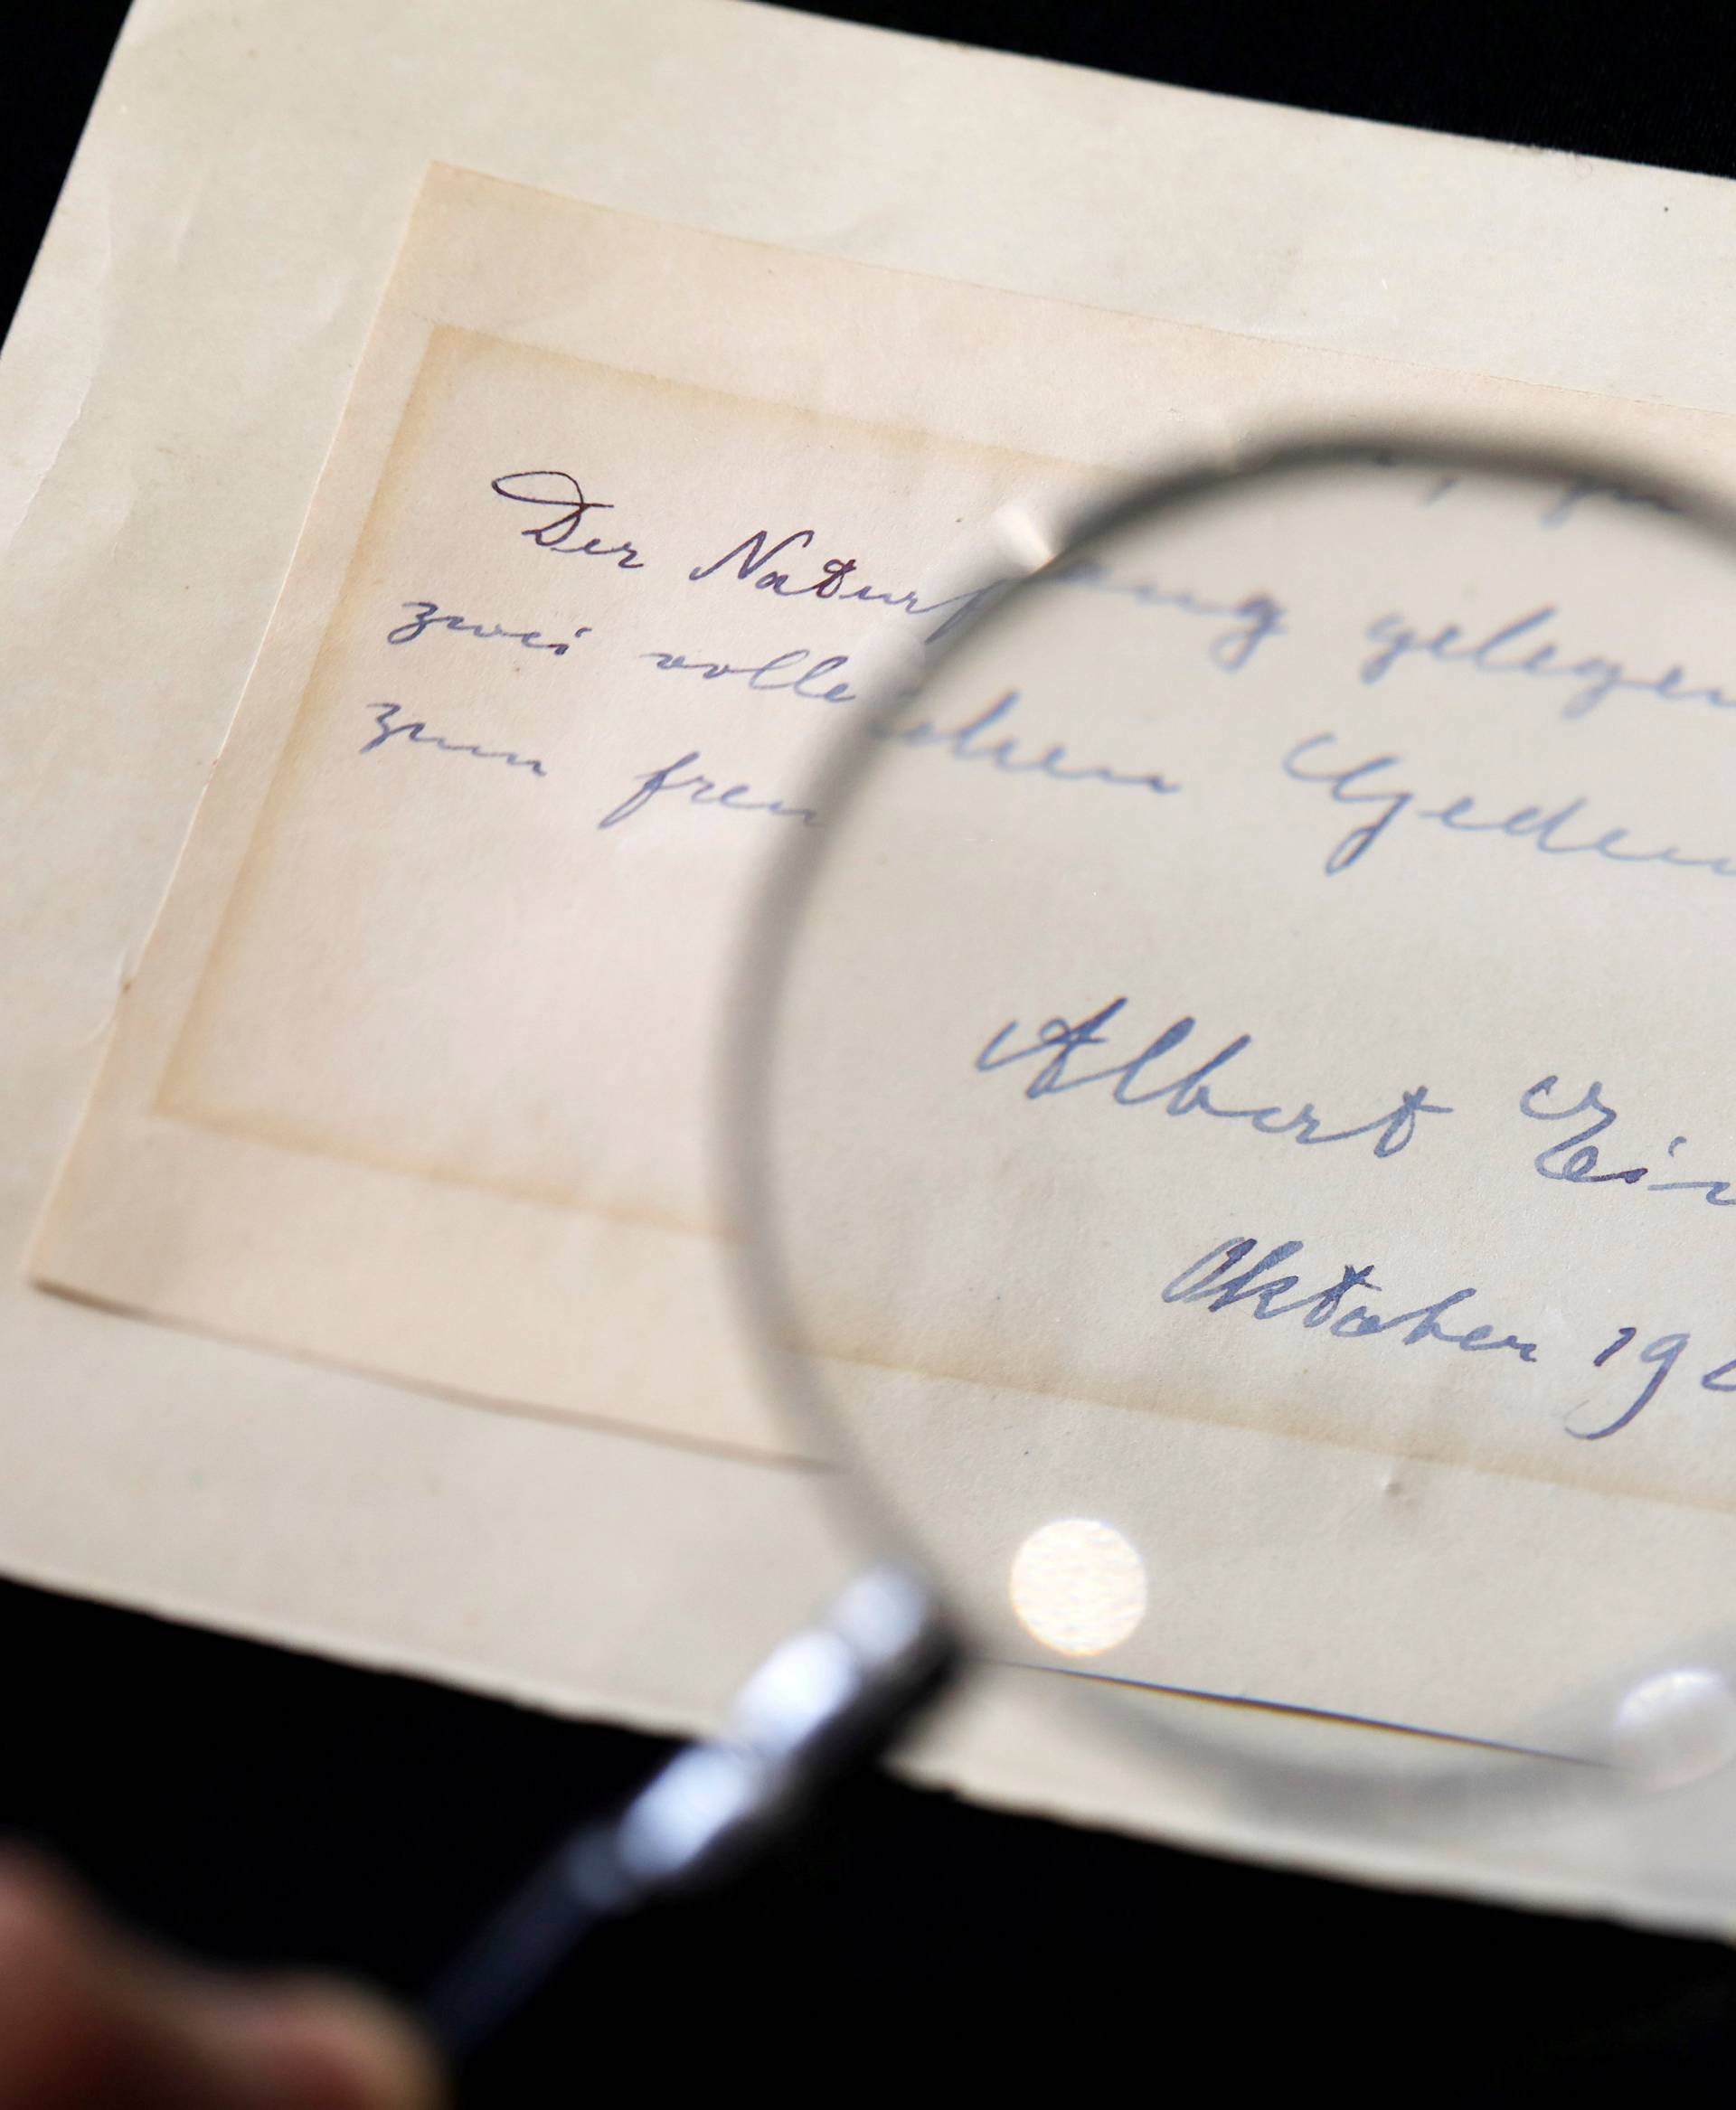 A note written by Albert Einstein to Italian chemistry student Elisabetta Piccini in Florence, Italy, in 1921 is seen before it is sold at an auction in Jerusalem